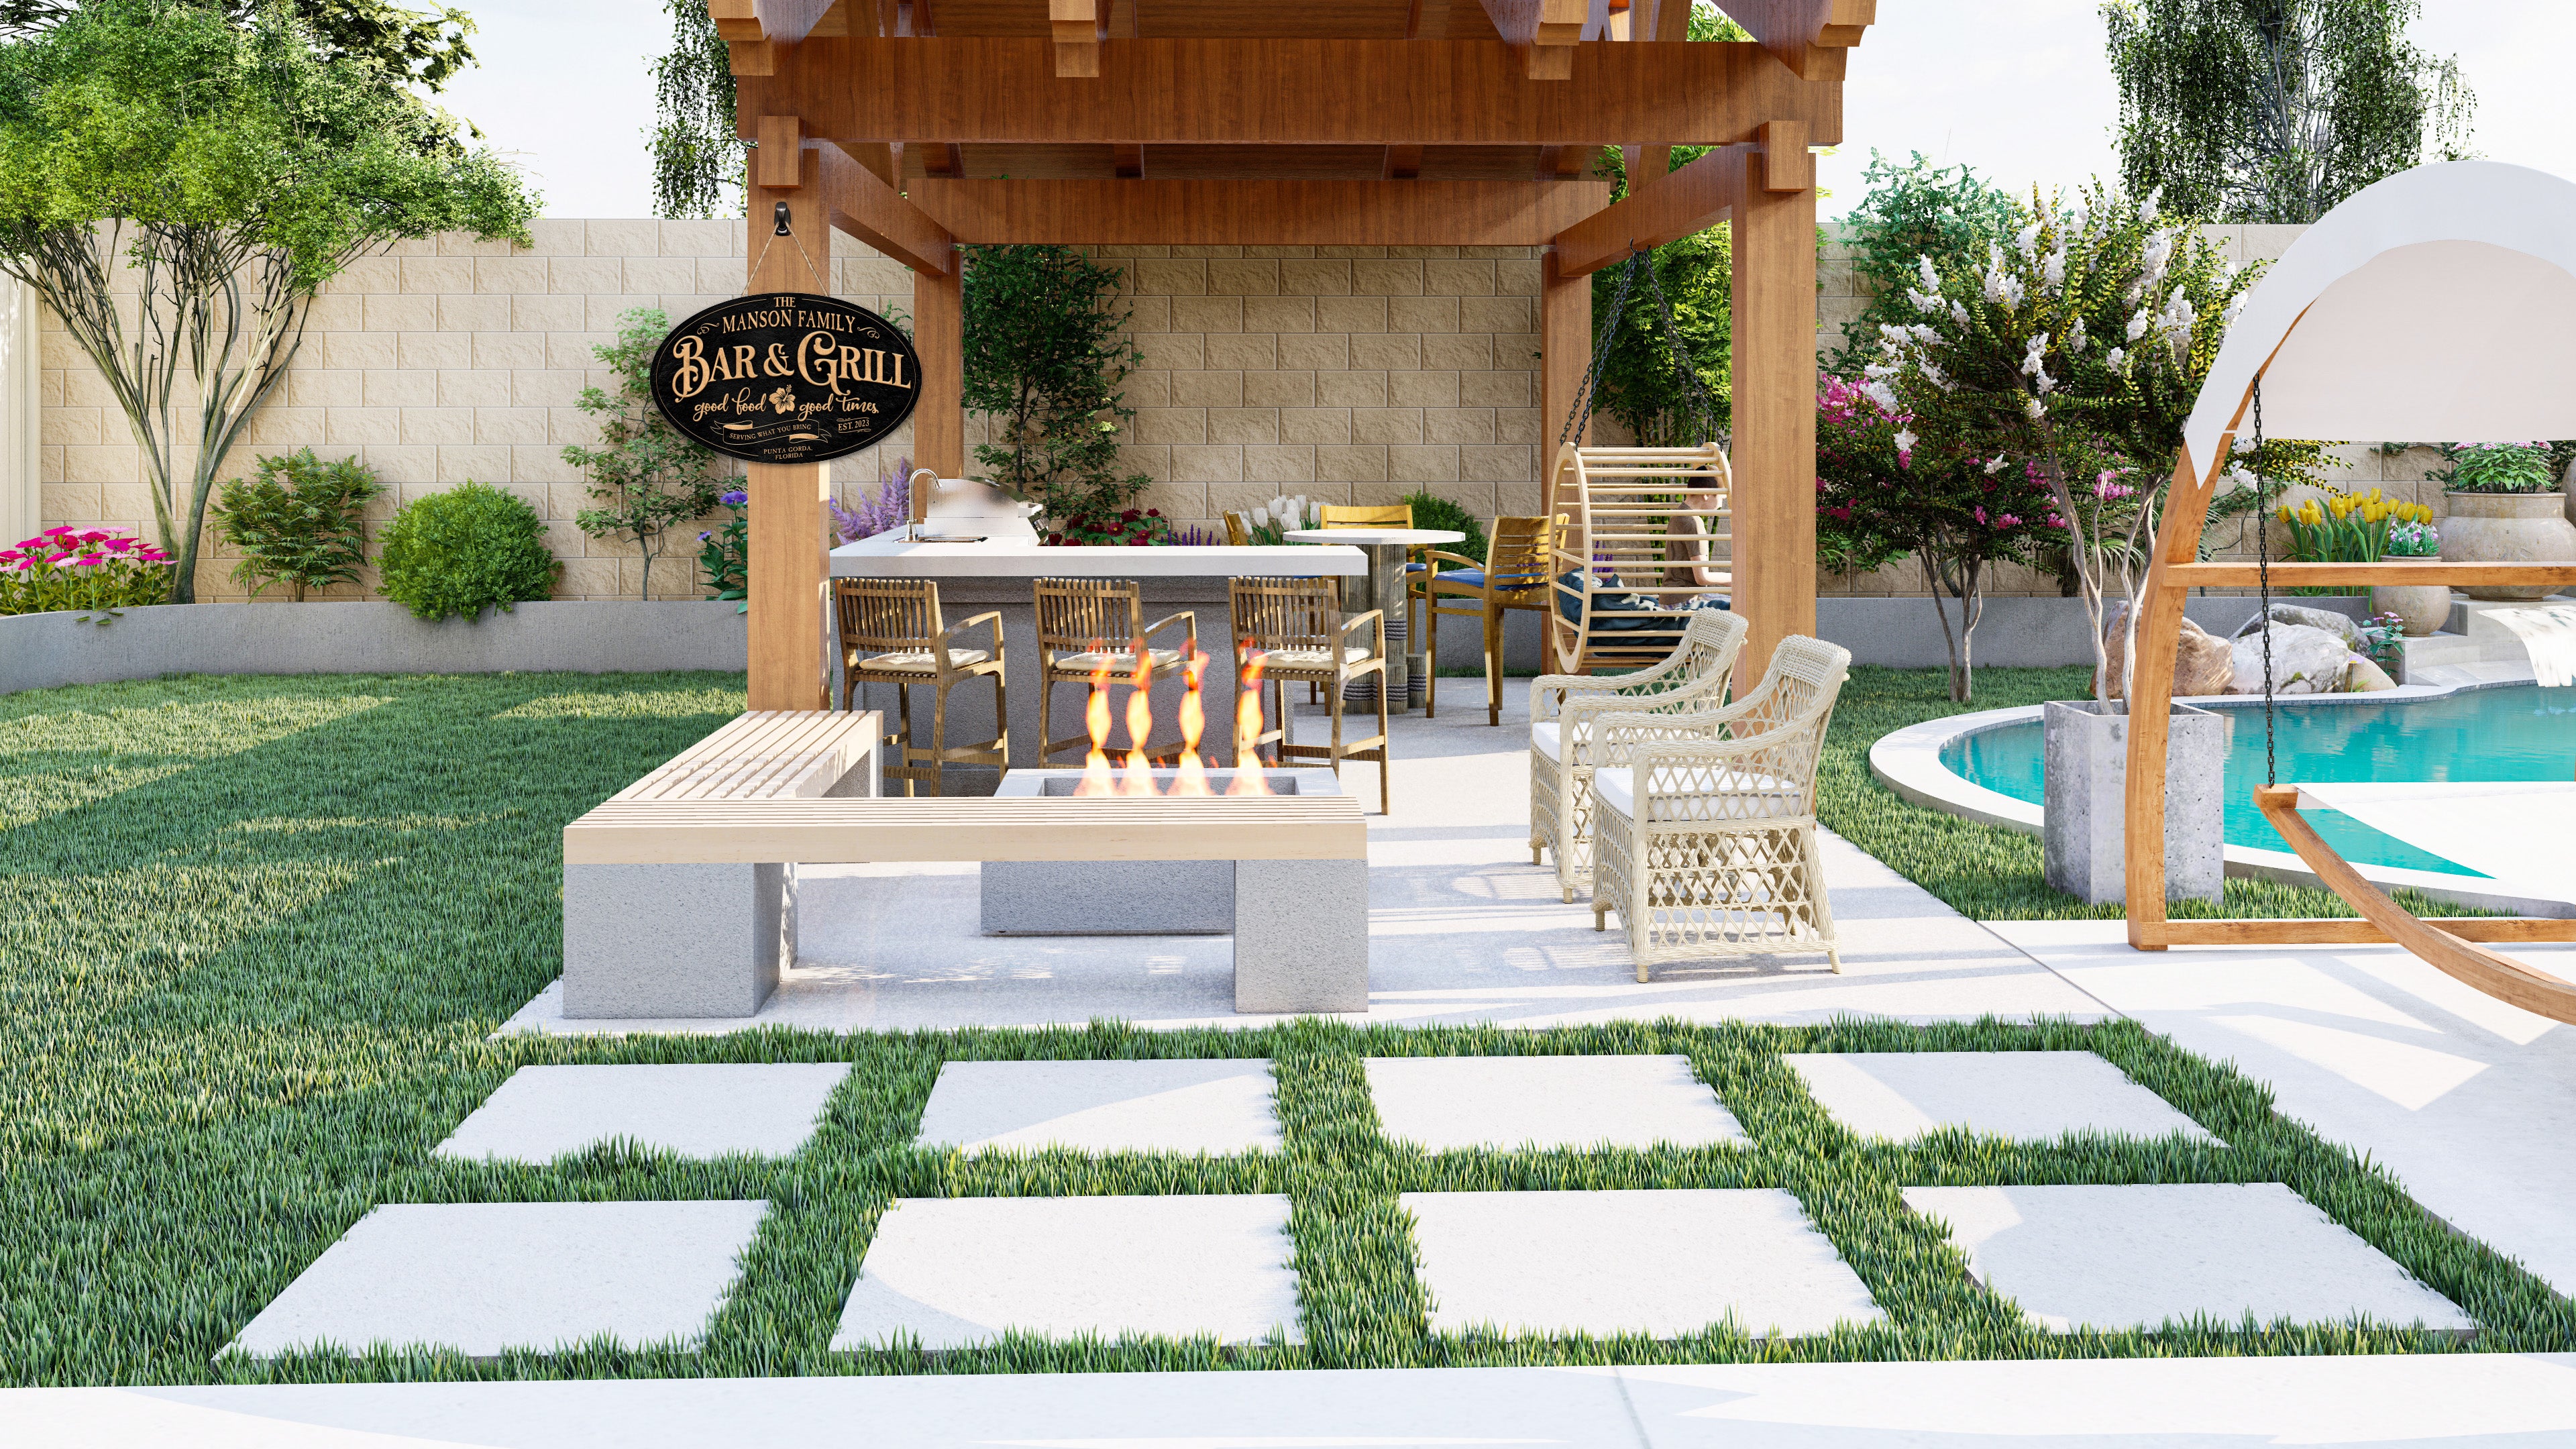 Patio Sign and Patio area on landscaped backyard scenery